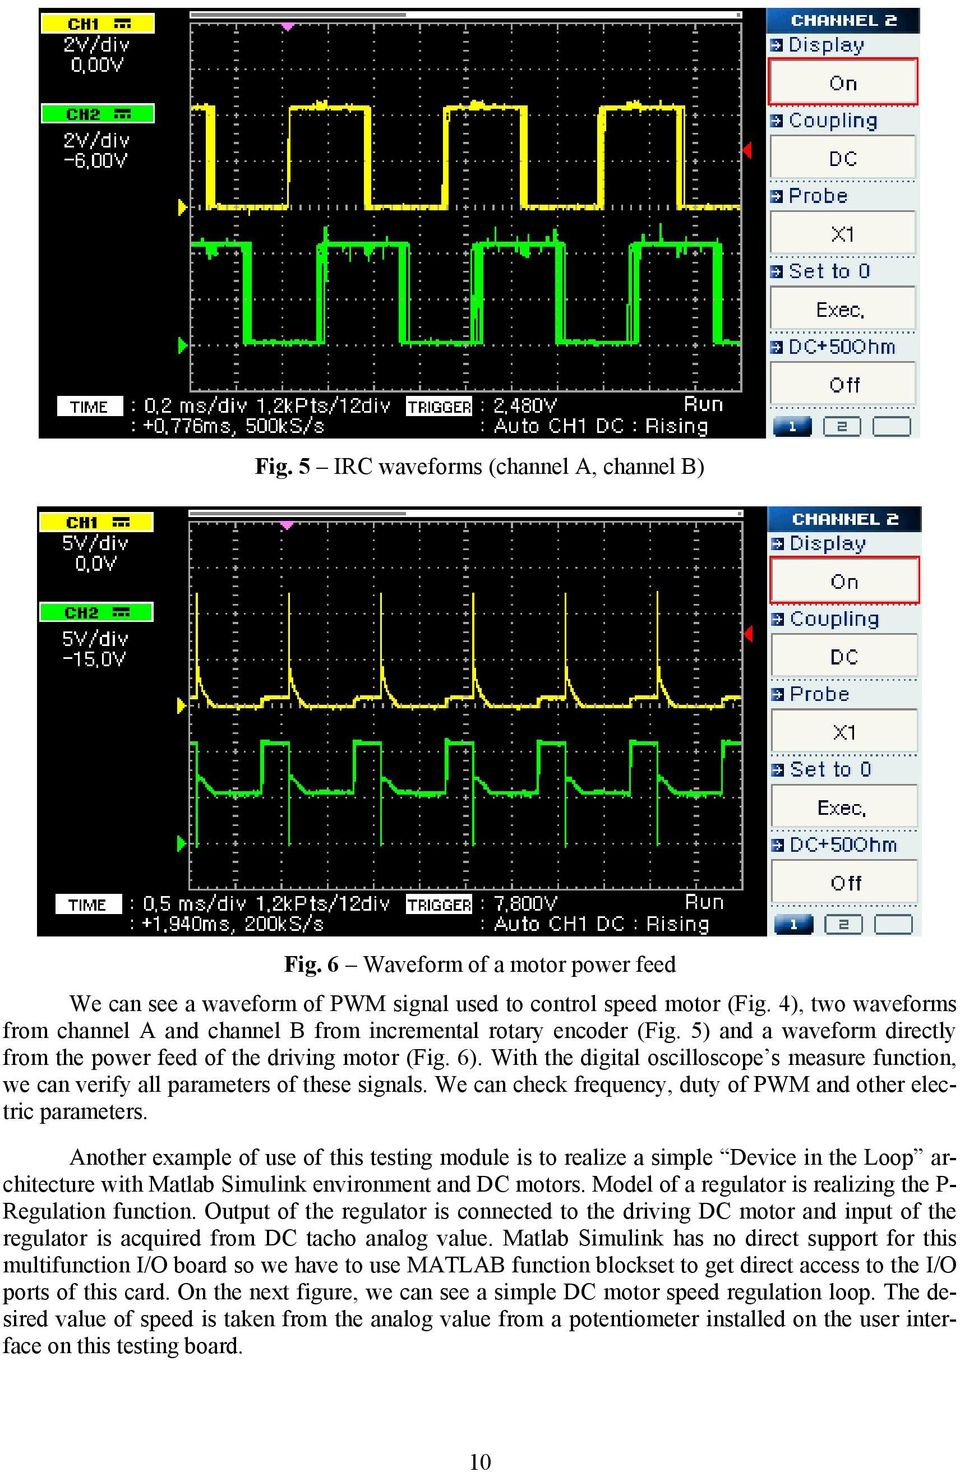 With the digital oscilloscope s measure function, we can verify all parameters of these signals. We can check frequency, duty of PWM and other electric parameters.